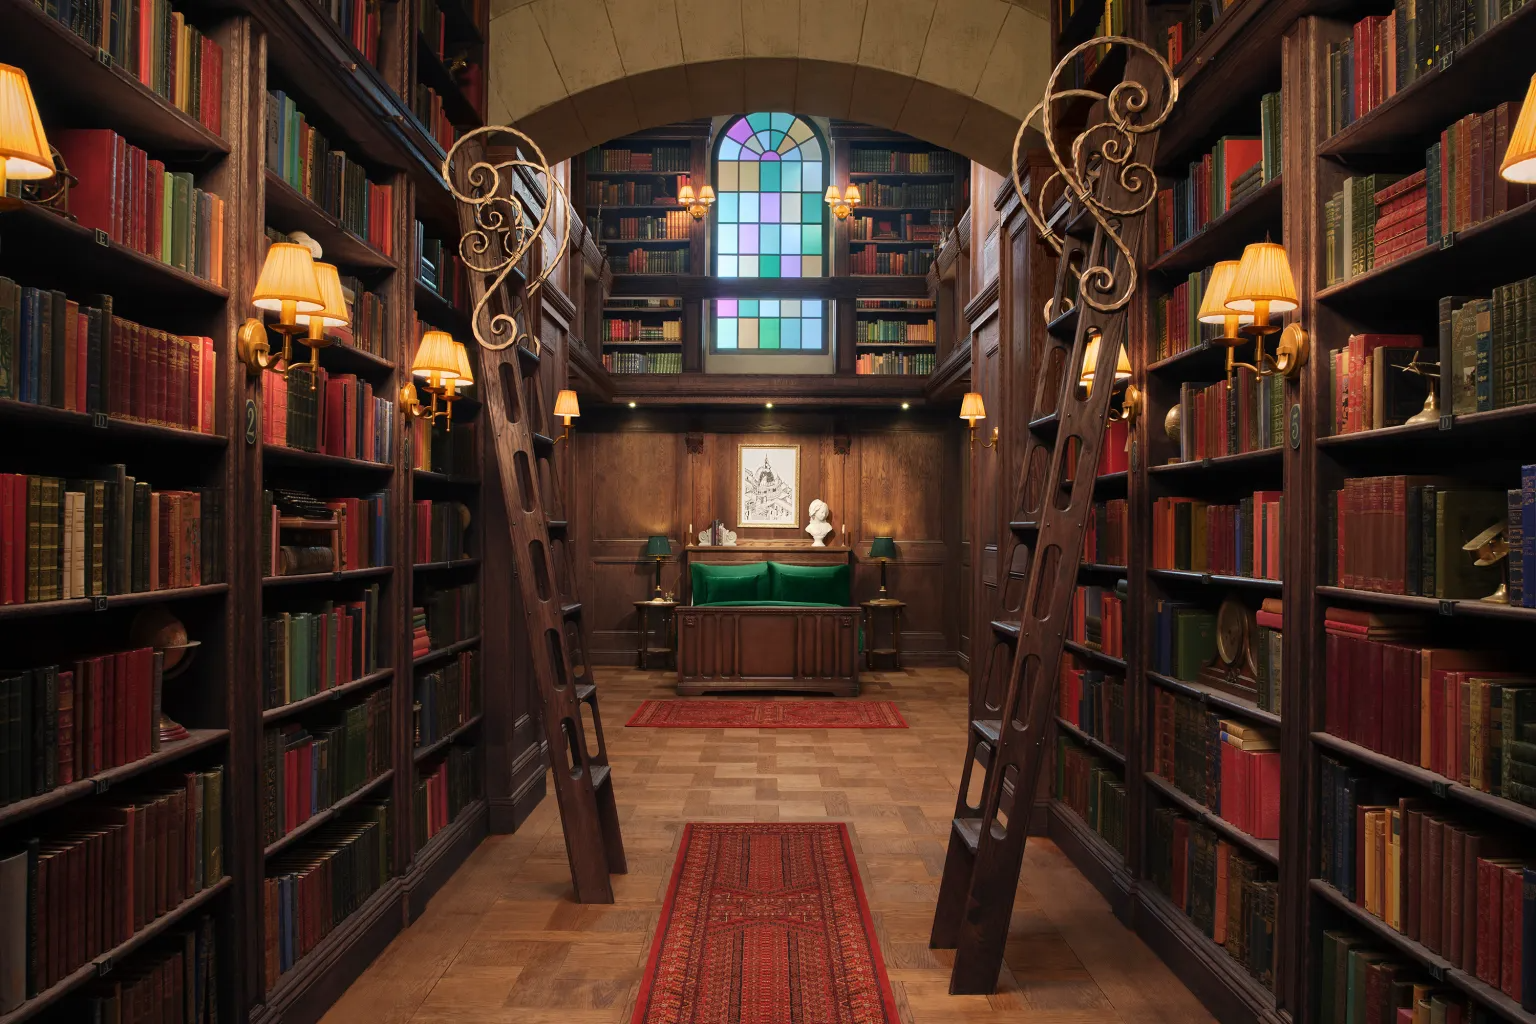 You Can Spend the Night in the Secret Library Tucked Inside St. Paul's Cathedral